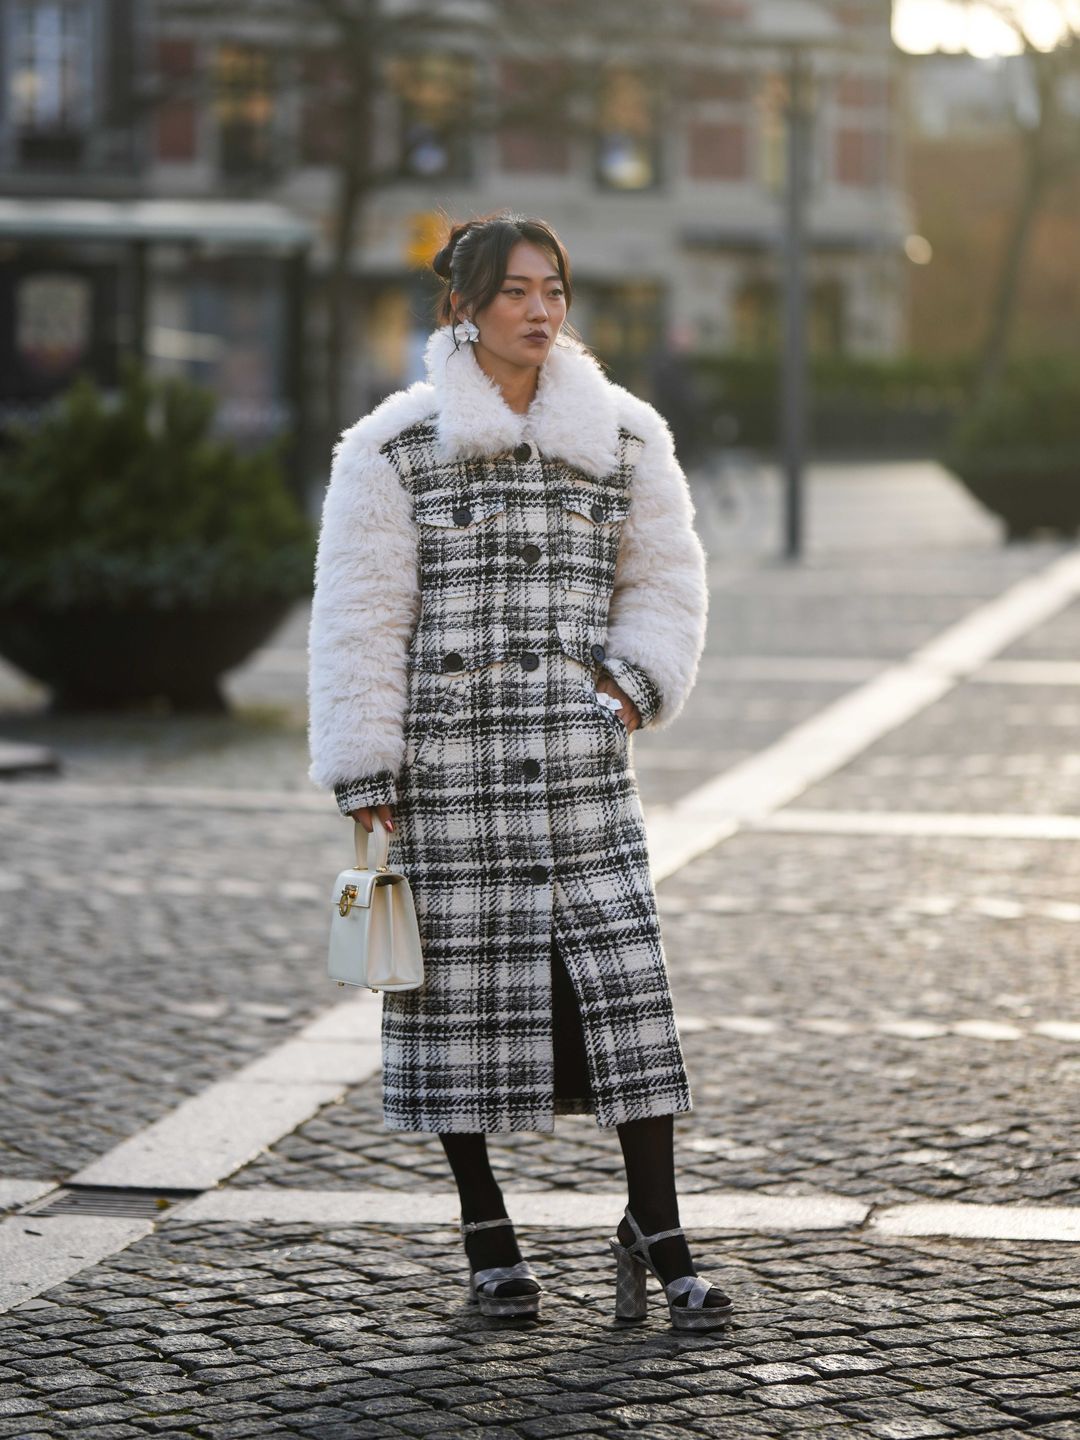 Woman wearing silver large earrings, a black and white checkered tweed pattern with white oversized fluffy sheep collar and sleeves buttoned long coat